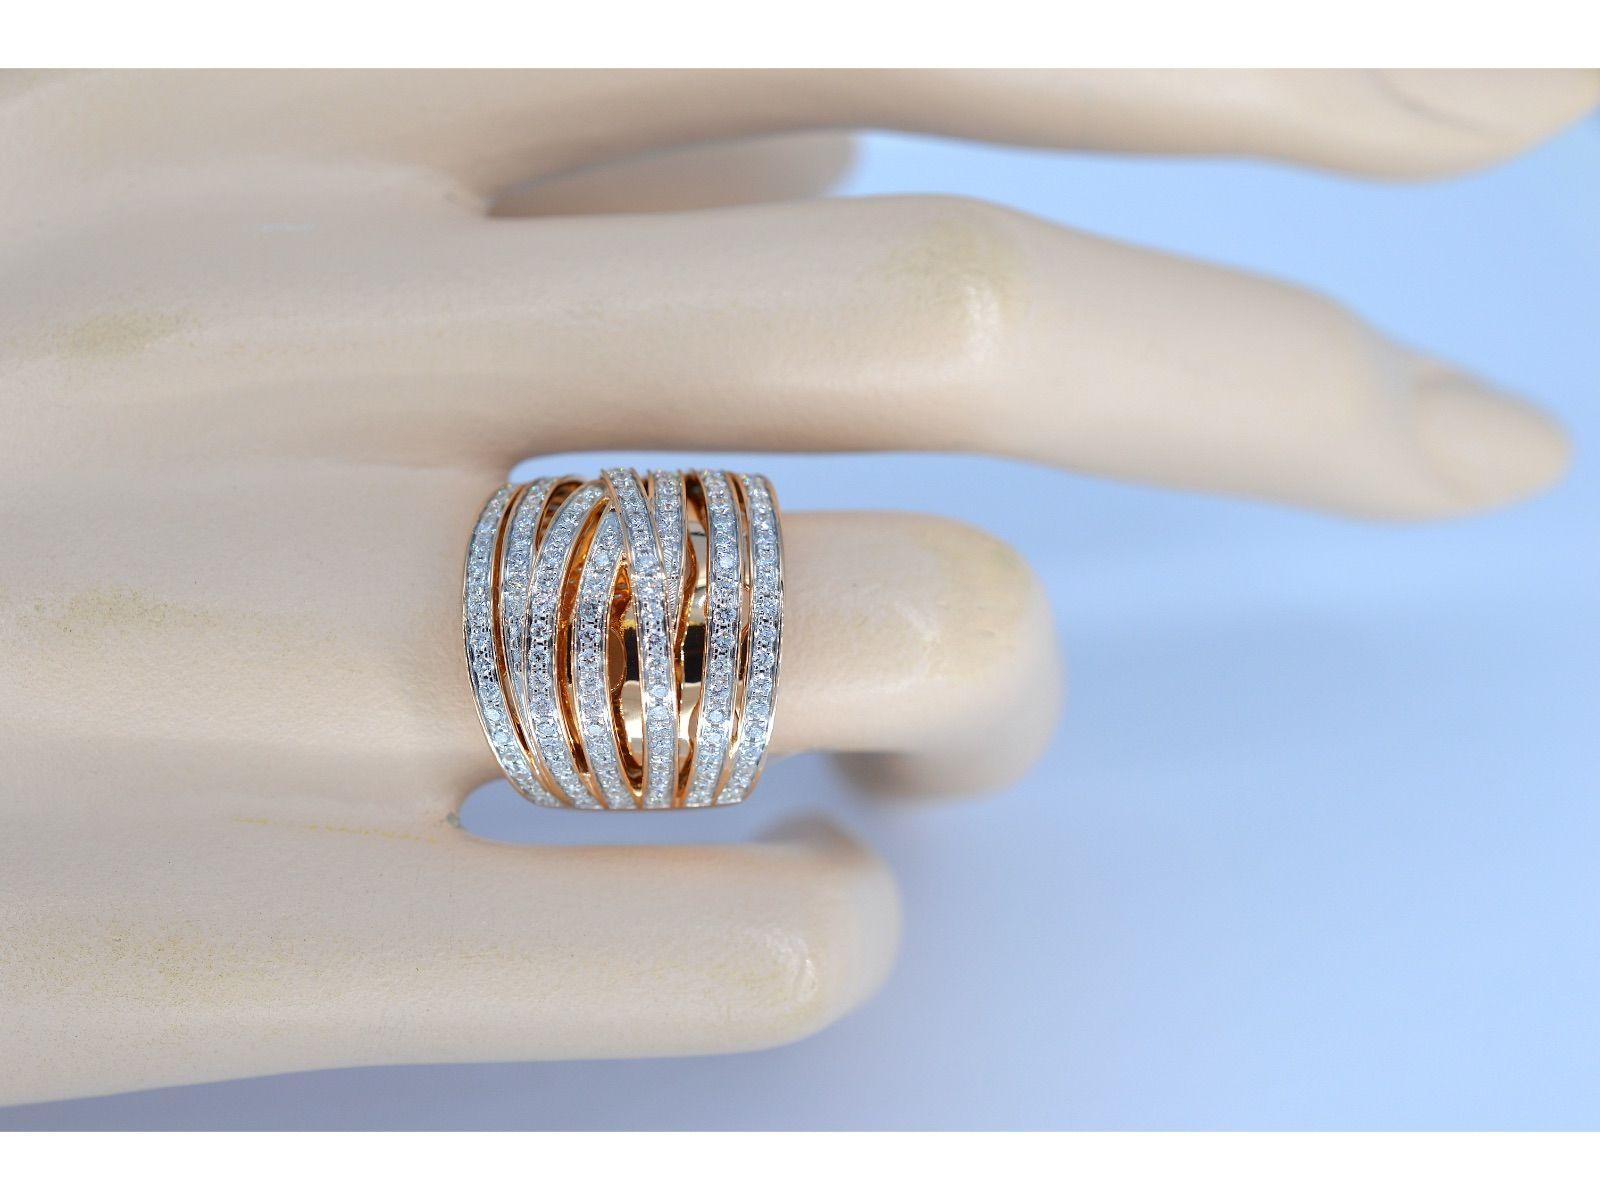 An 18K rose gold design ring with high quality brilliant cut diamonds is a striking and sophisticated piece of jewelry that combines the warmth of rose gold with the brilliance of diamonds. The band is typically made of 18K rose gold, which